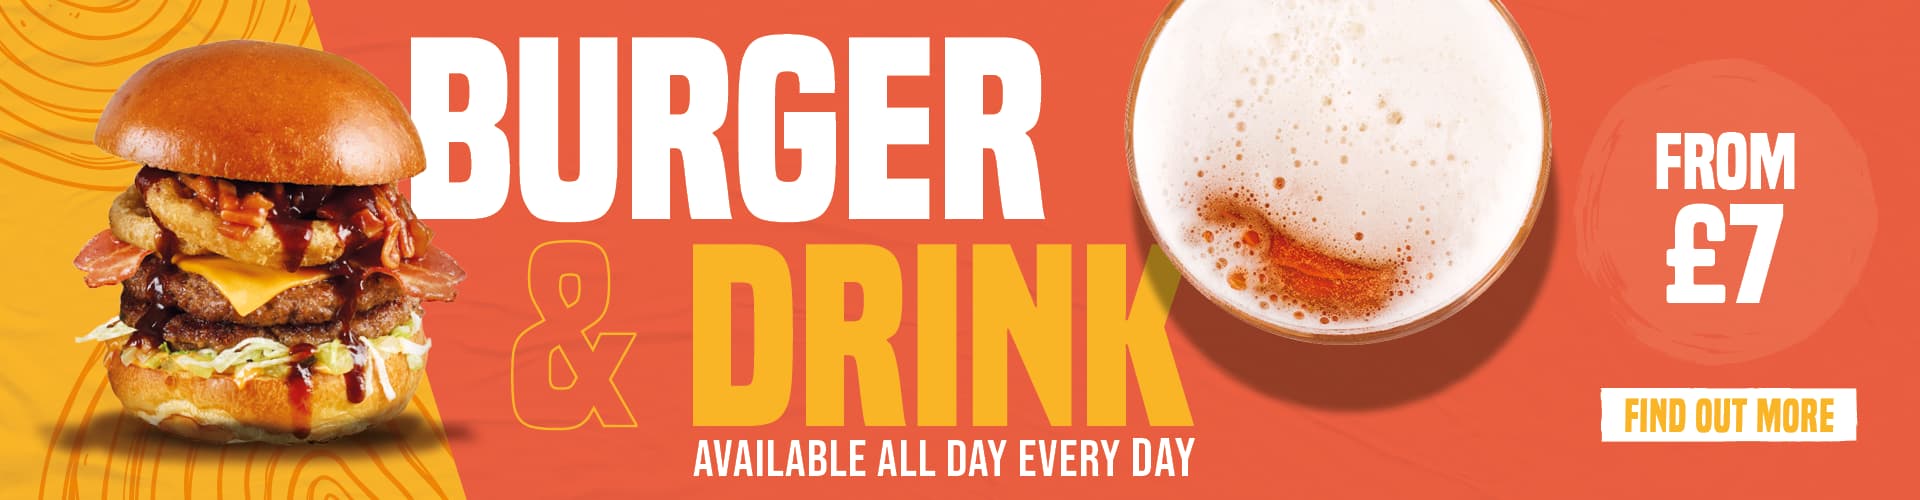 Burger & Drink, Available All Day Every Day for £7. Find Out More